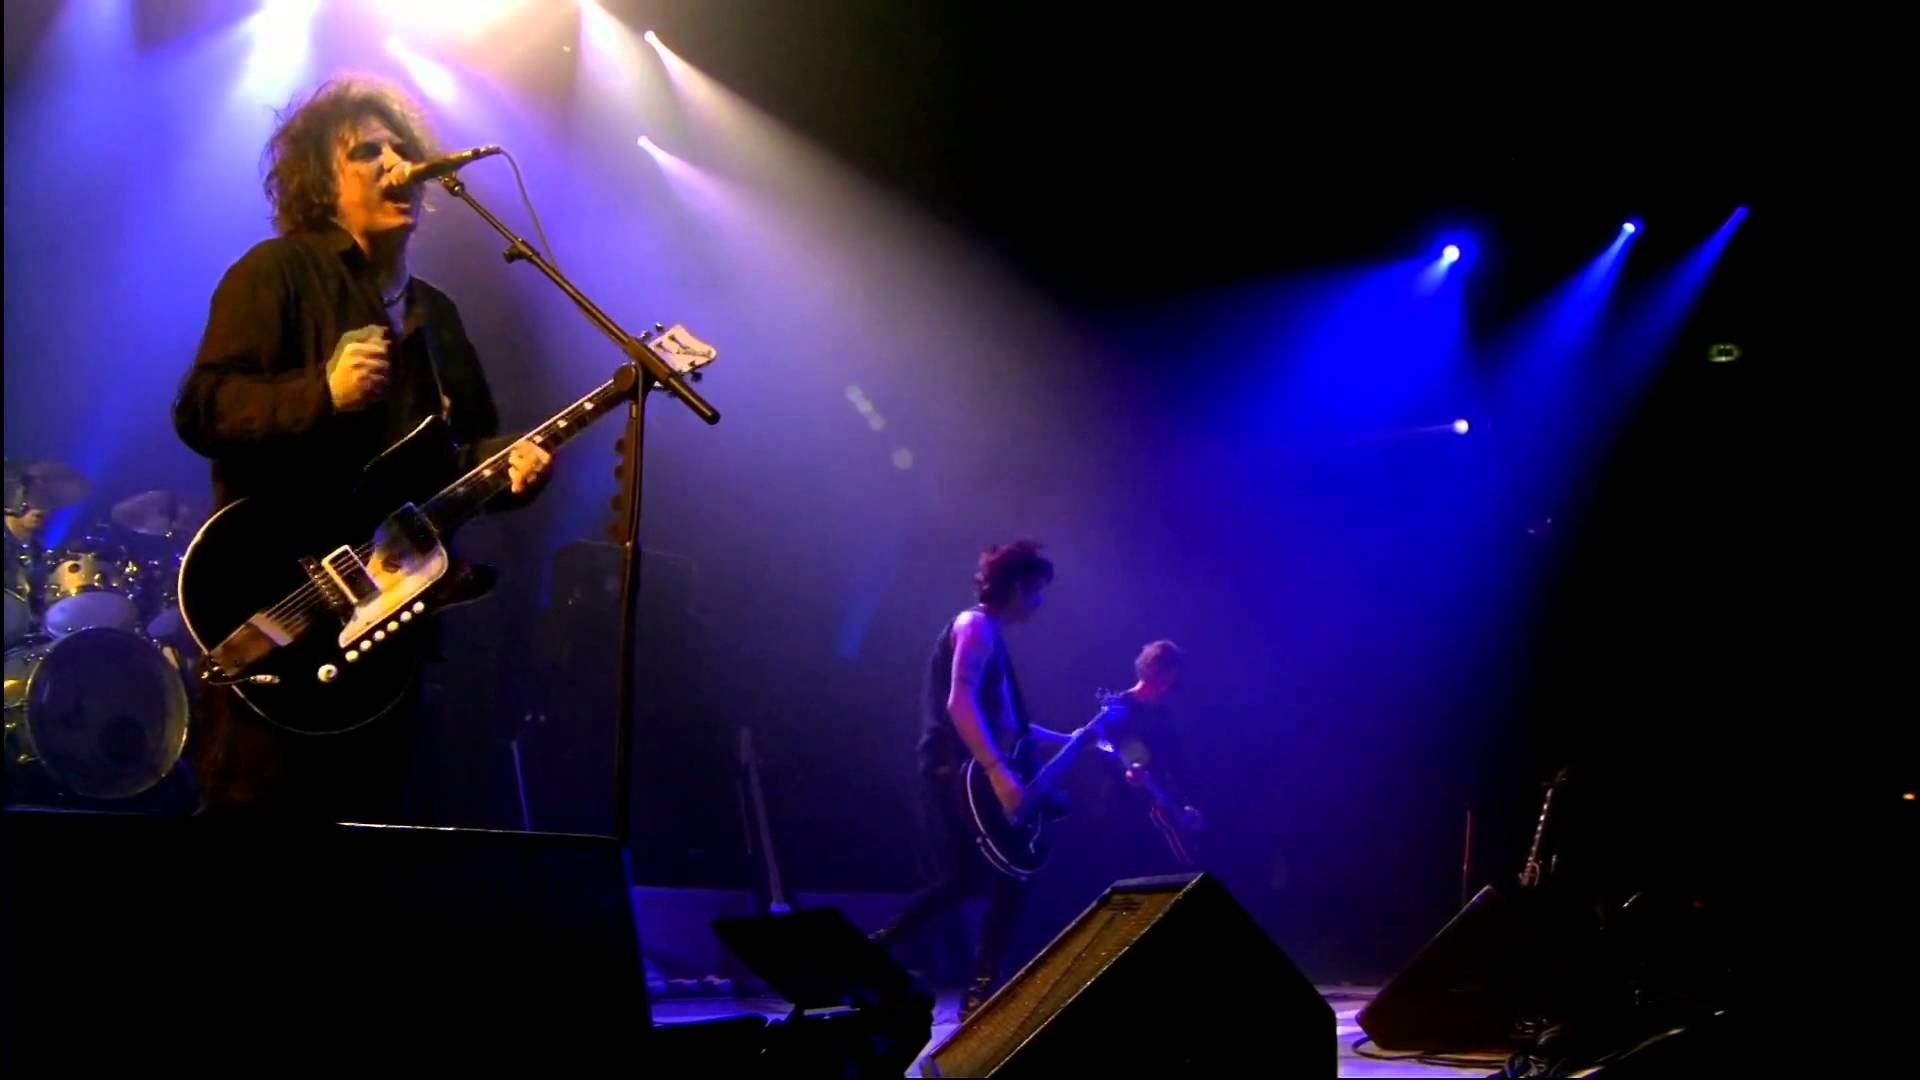 1920x1080 The Cure - 2/3 "Disintegration" Full concert - Live in Berlin 2003 - YouTube